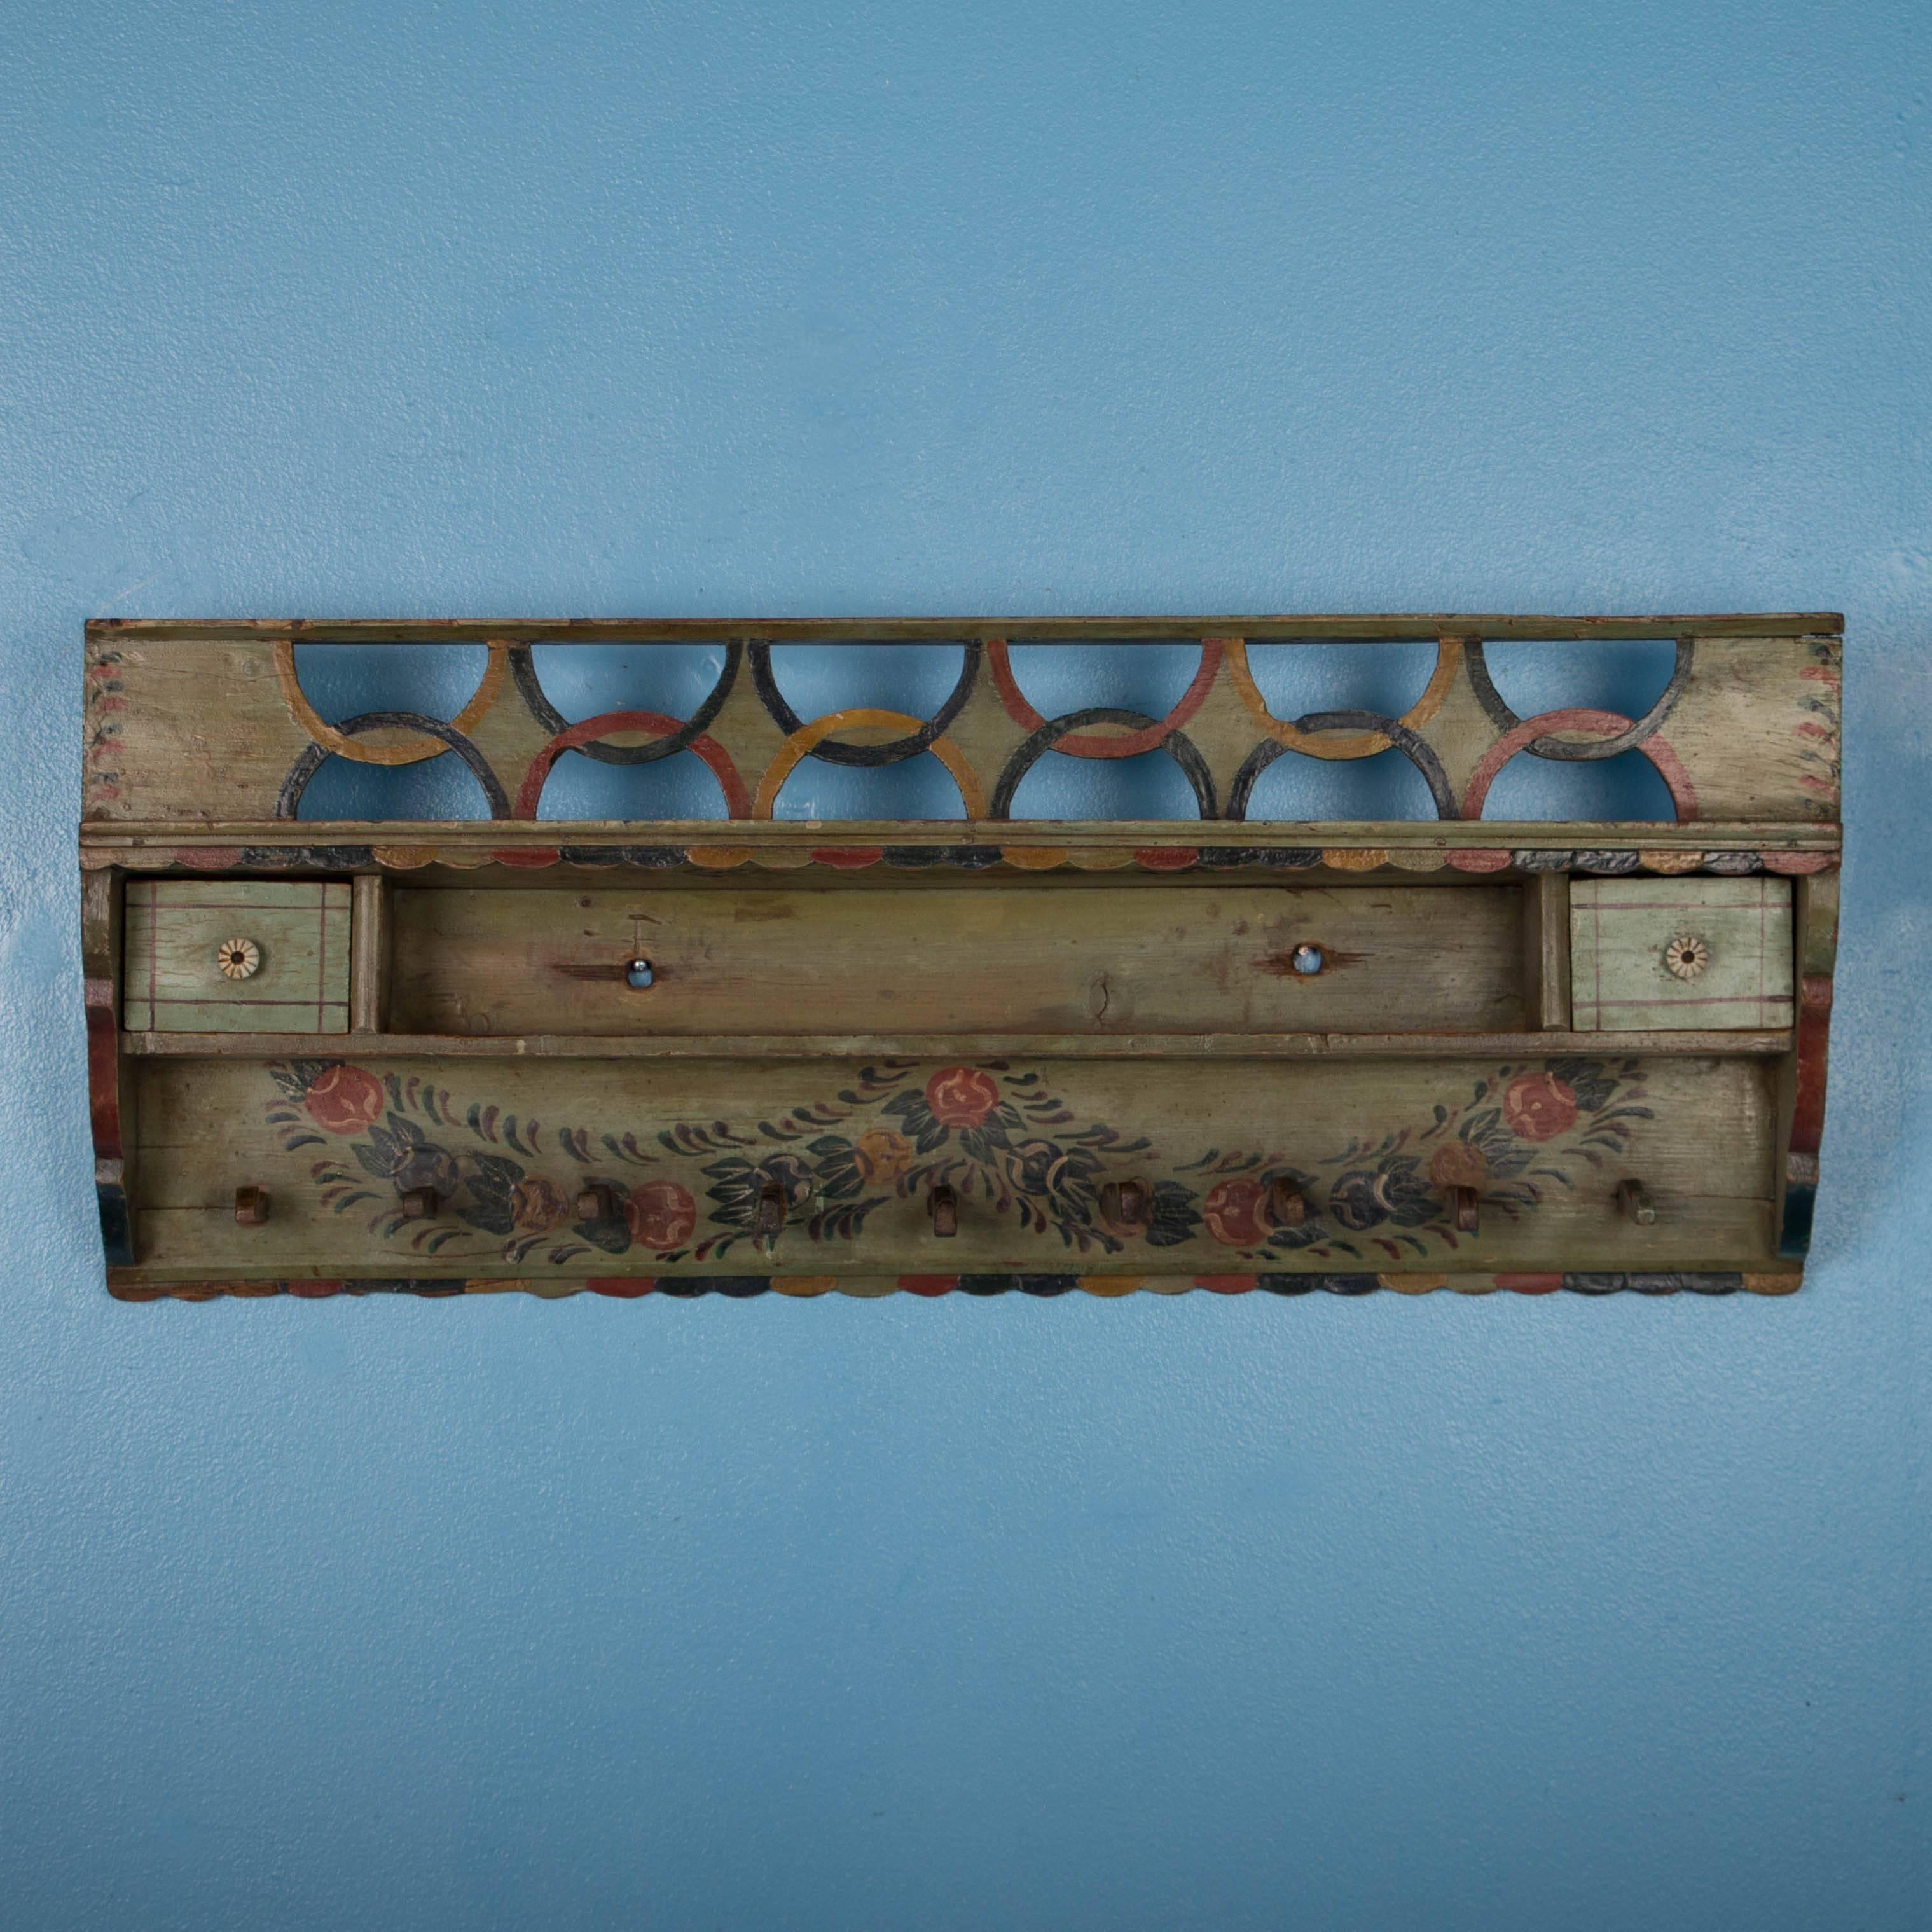 This delightful hanging shelf / rack still maintains its original green paint, with flowers and other details in red, blue, yellow and green. Painted racks were common elements in European country homes, however the exceptionally fine painted